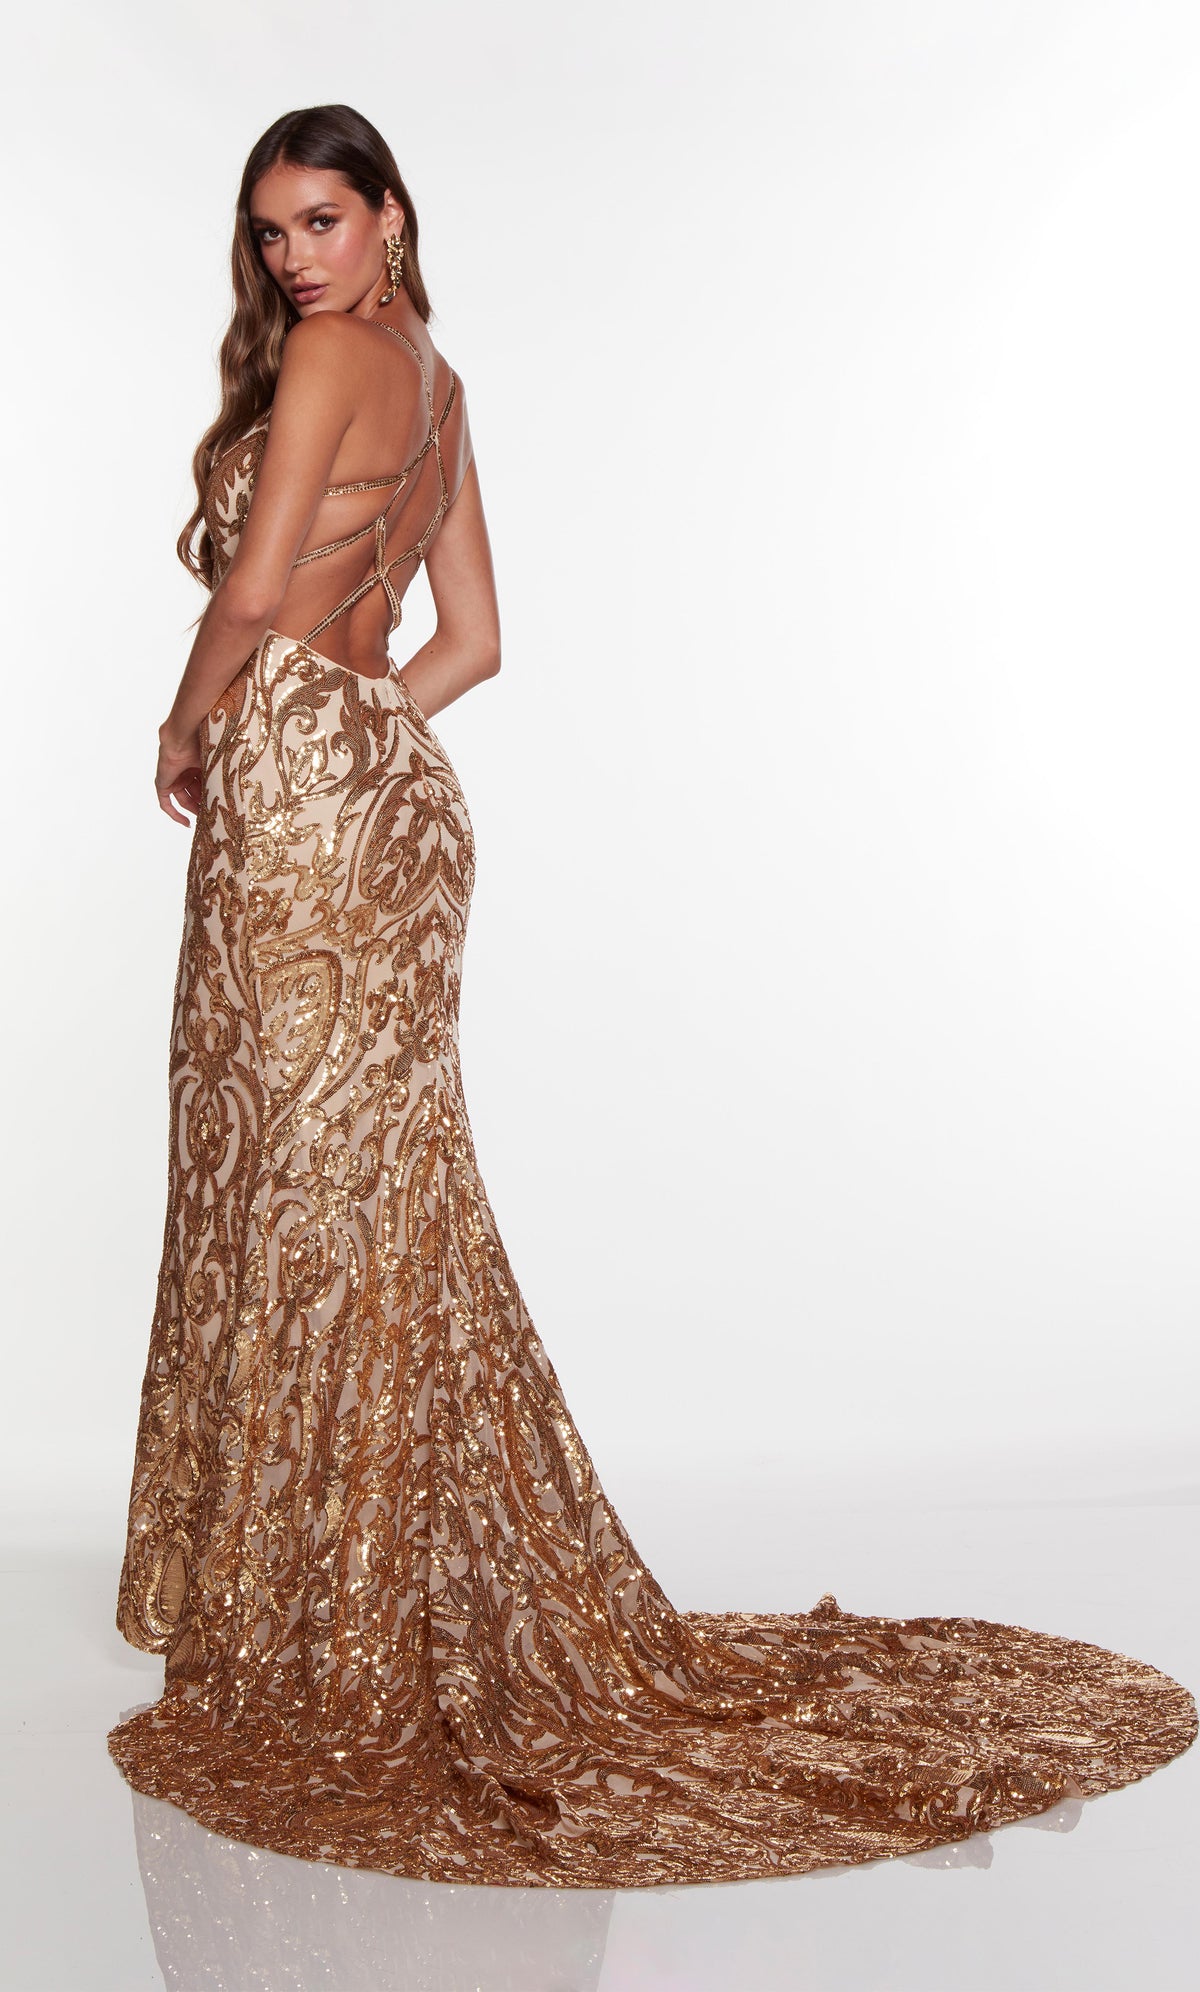 Elegant prom dress with a cut out back and long train in gold sequins.